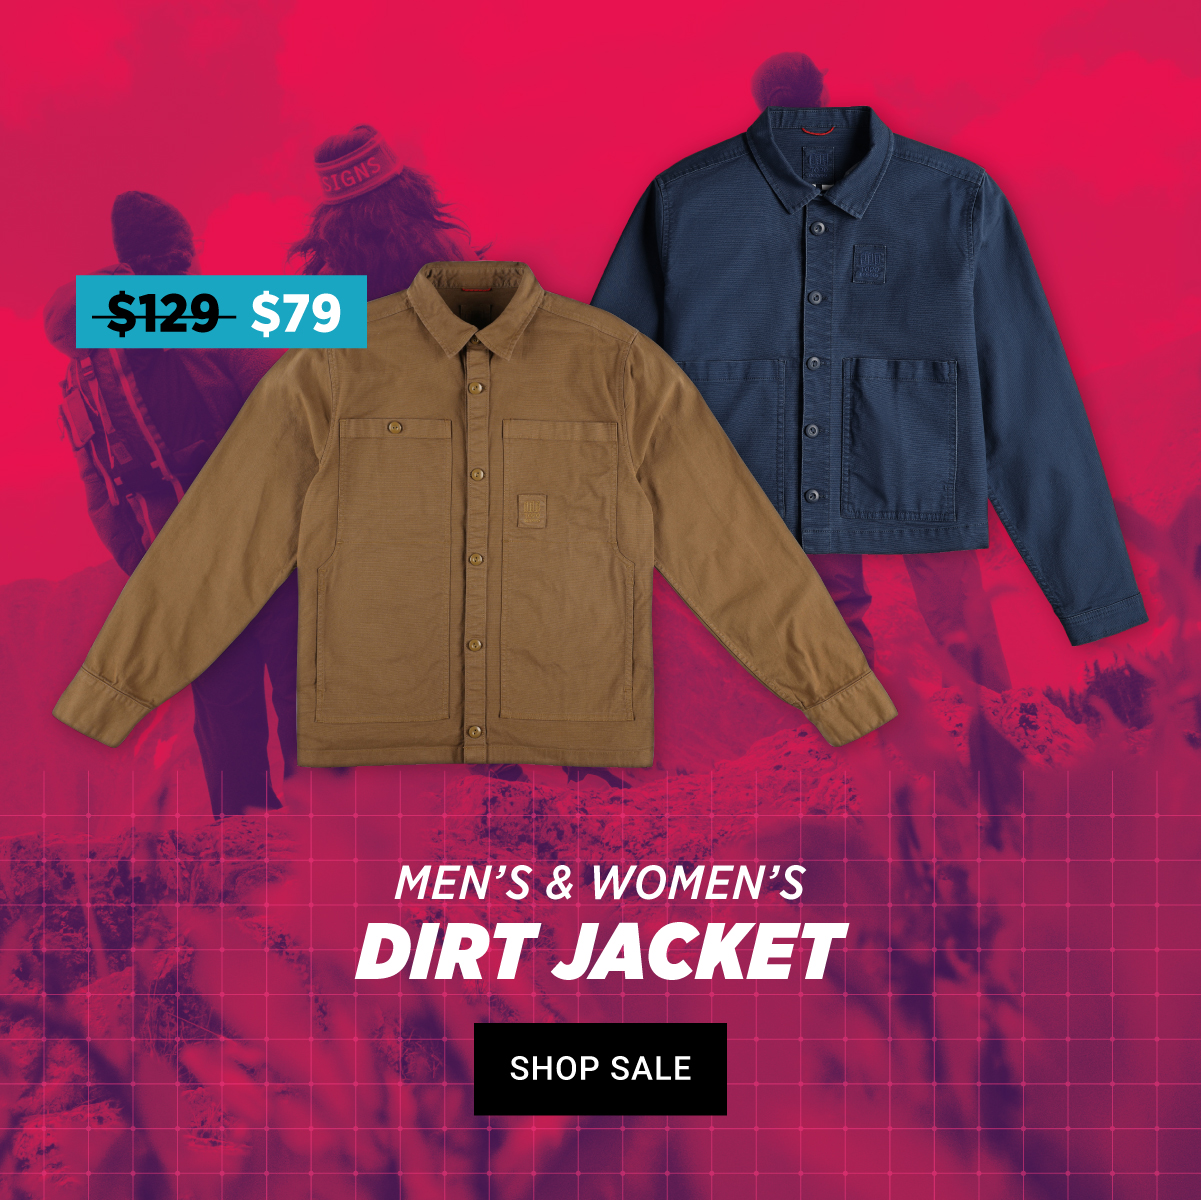 Dirt Jacket - Up to 70% Off